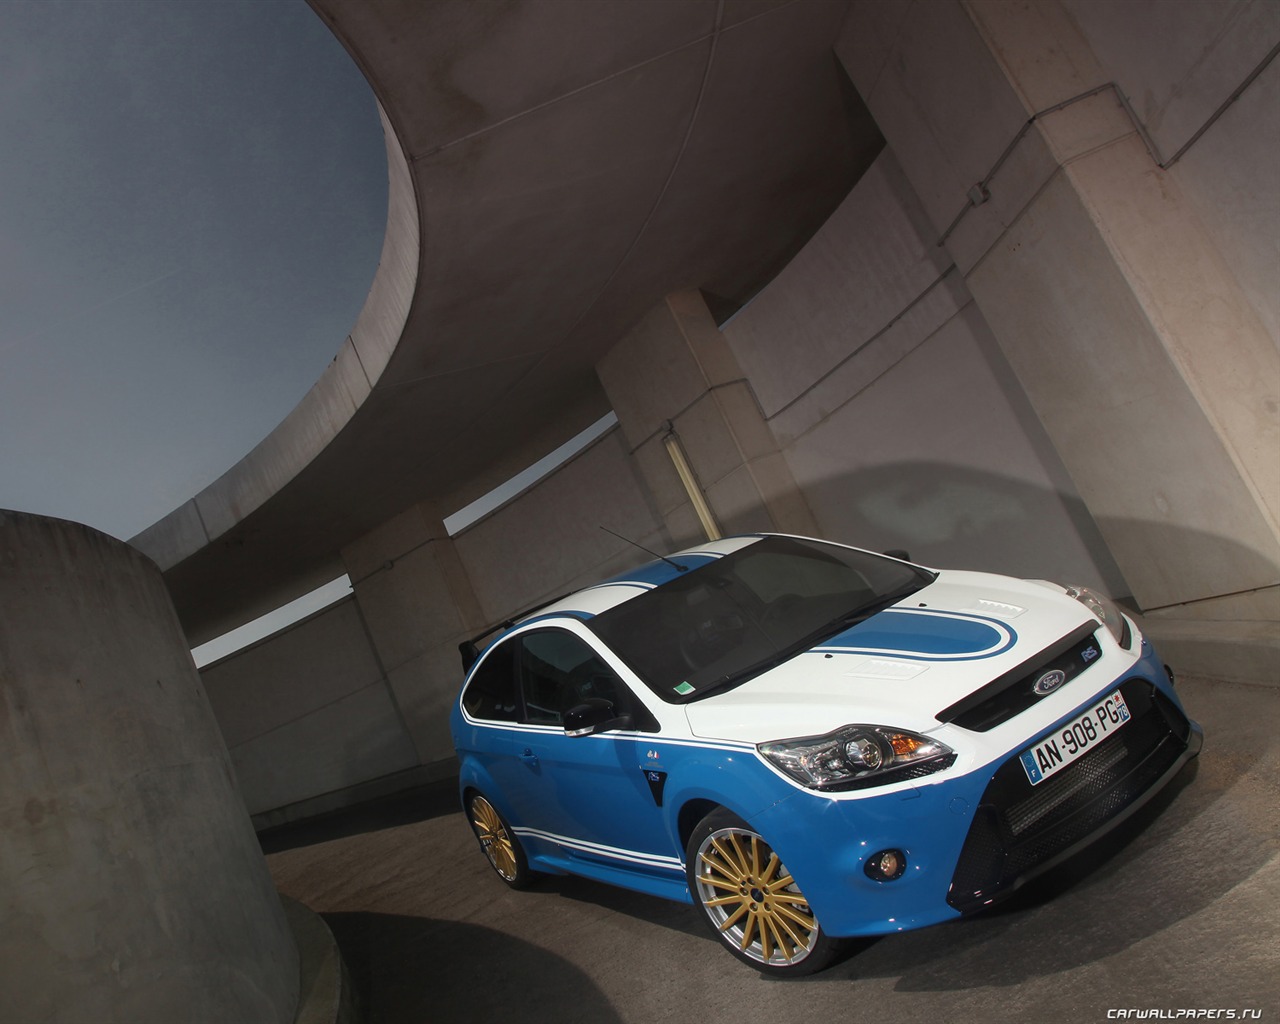 Ford Focus RS Le Mans Classic - 2010 福特4 - 1280x1024